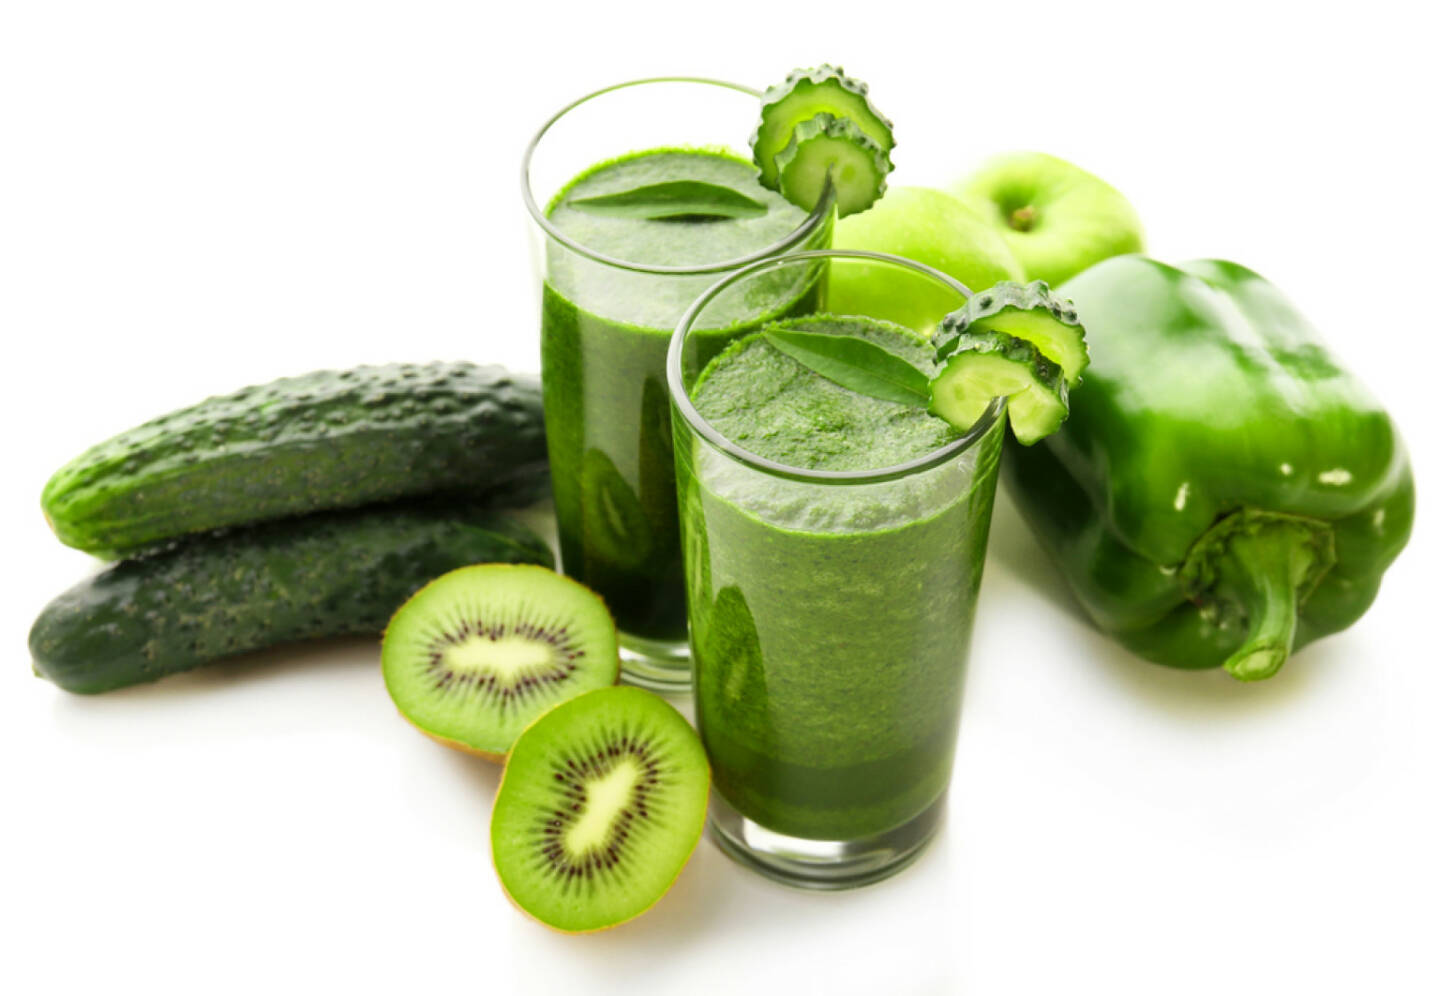 Smoothie, Getränk, trinken, Gesundheit, Gurke, Kiwi, grün, Paprika, http://www.shutterstock.com/de/pic-246679597/stock-photo-green-fresh-healthy-juice-with-fruits-and-vegetables-isolated-on-white-background.html